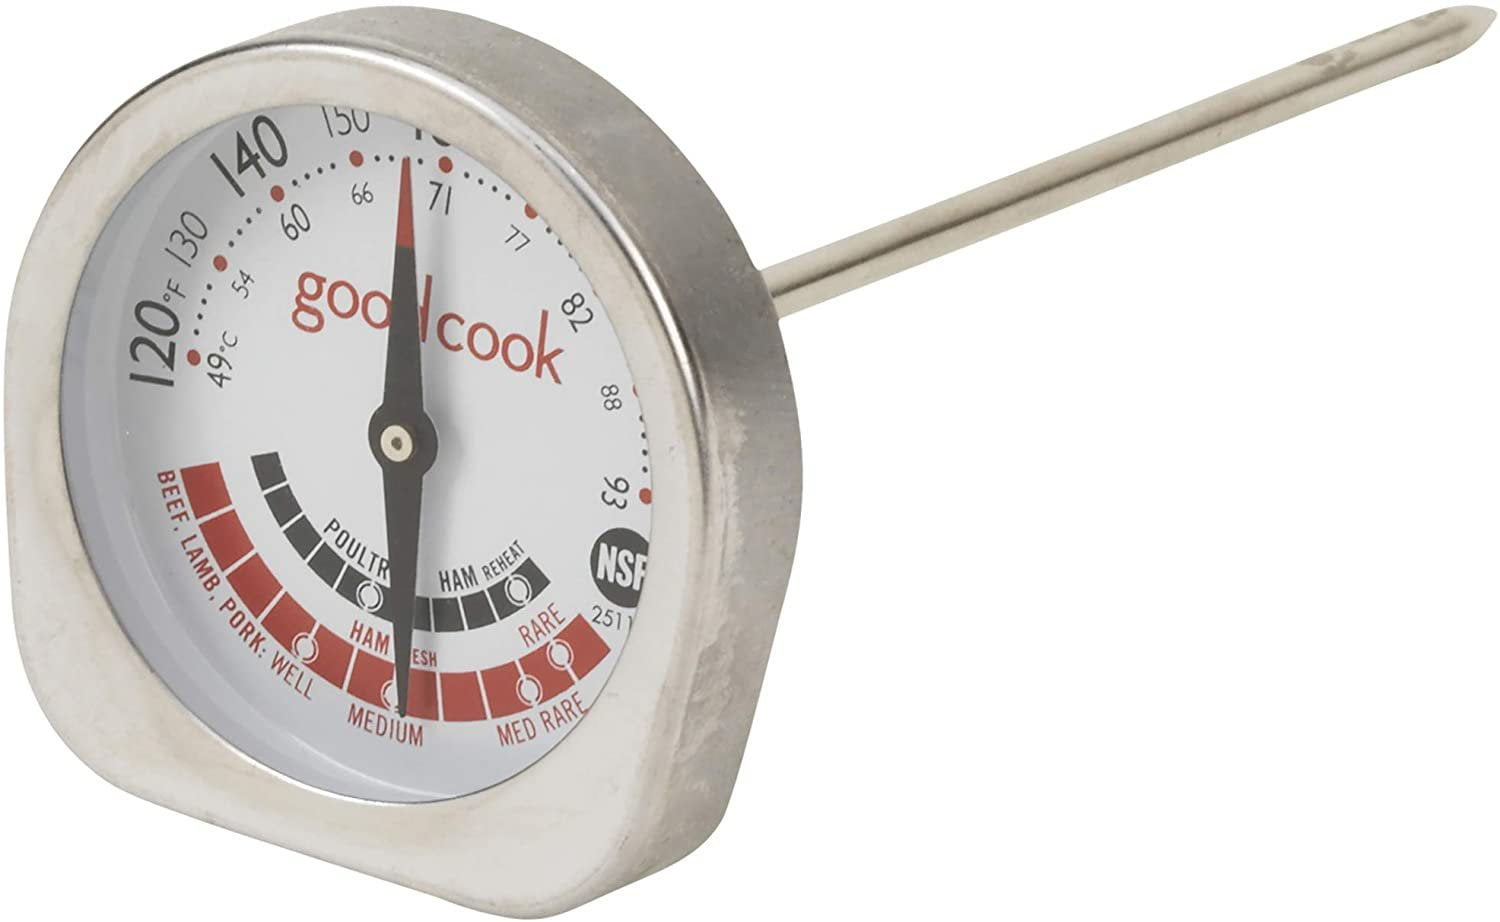 This Discounted Meat Thermometer Is a Must-Buy Before Thanksgiving - CNET